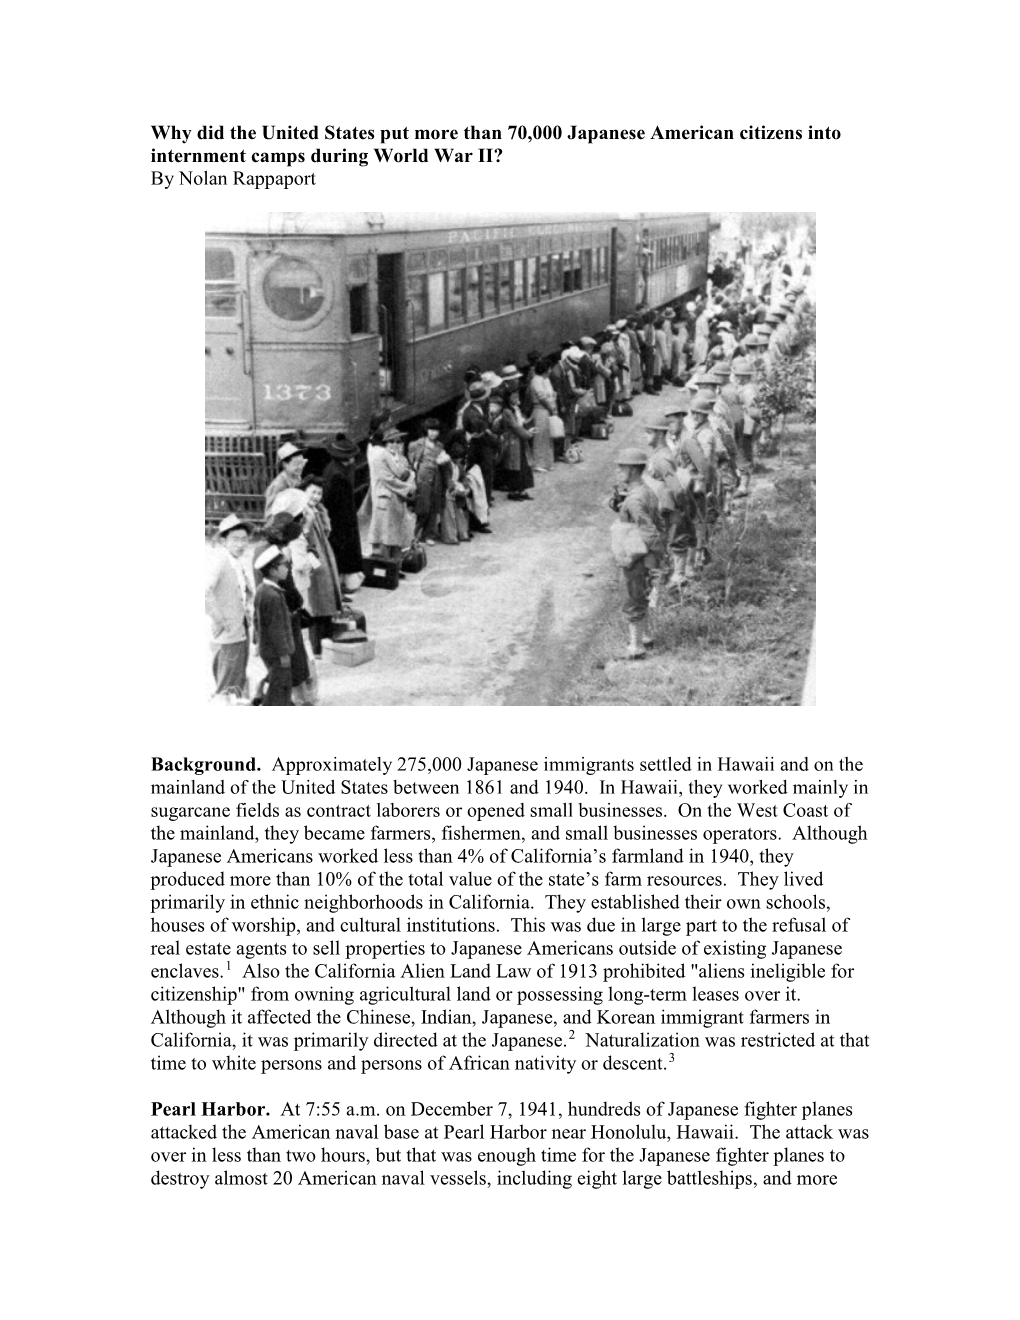 Why Did the United States Put More Than 70,000 Japanese American Citizens Into Internment Camps During World War II? by Nolan Rappaport